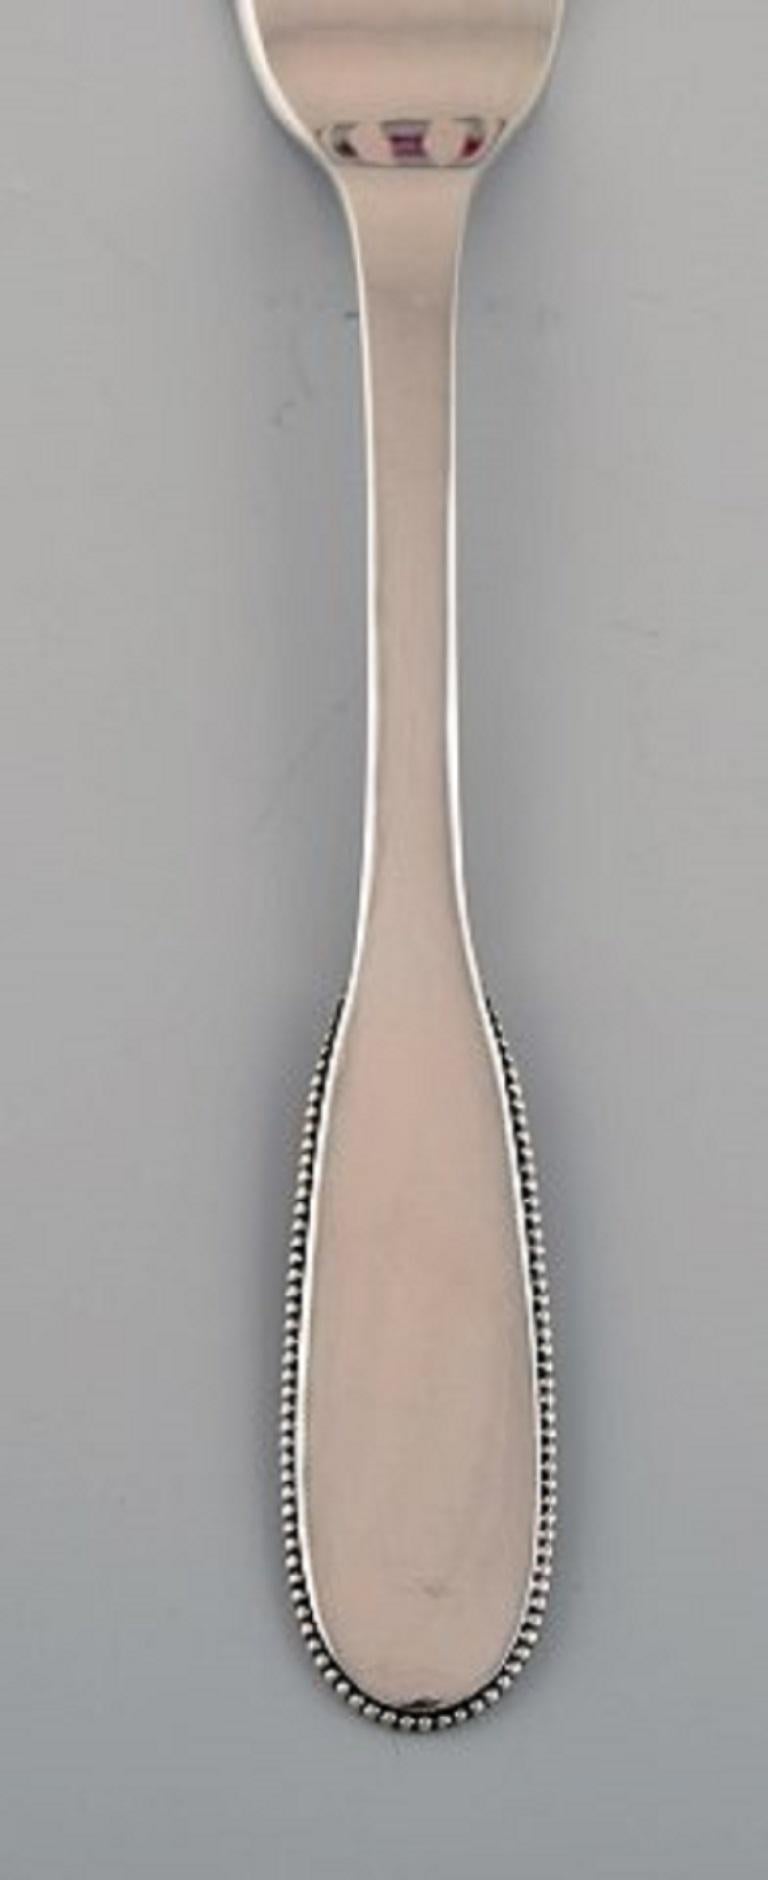 Evald Nielsen number 14 lunch fork in hammered silver, 1920s.
Measures: Length 17.7 cm.
Stamped.
In excellent condition.
Our skilled Georg Jensen silversmith / jeweler can polish all silver and gold so that it appears as new. The price is very